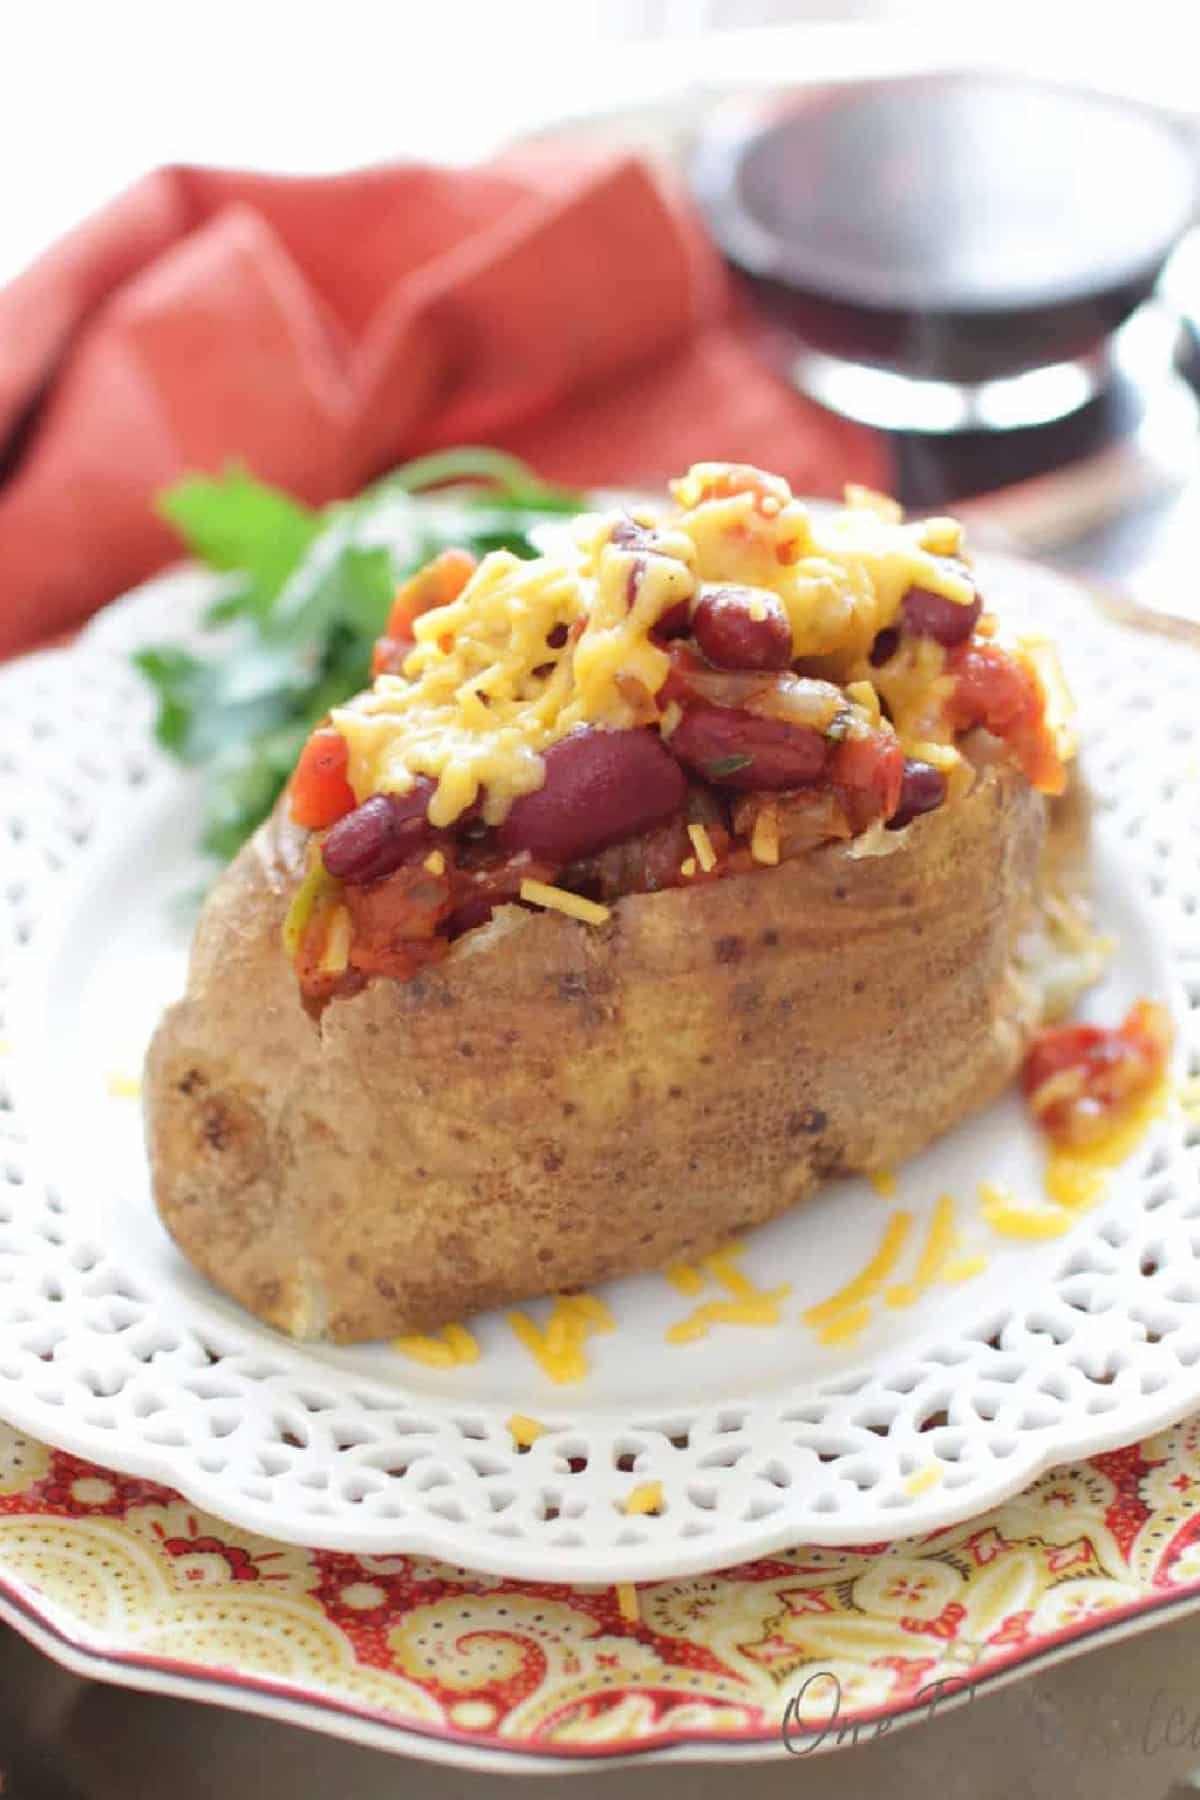 Baked potato with chili and melted cheese on a fancy white plate.